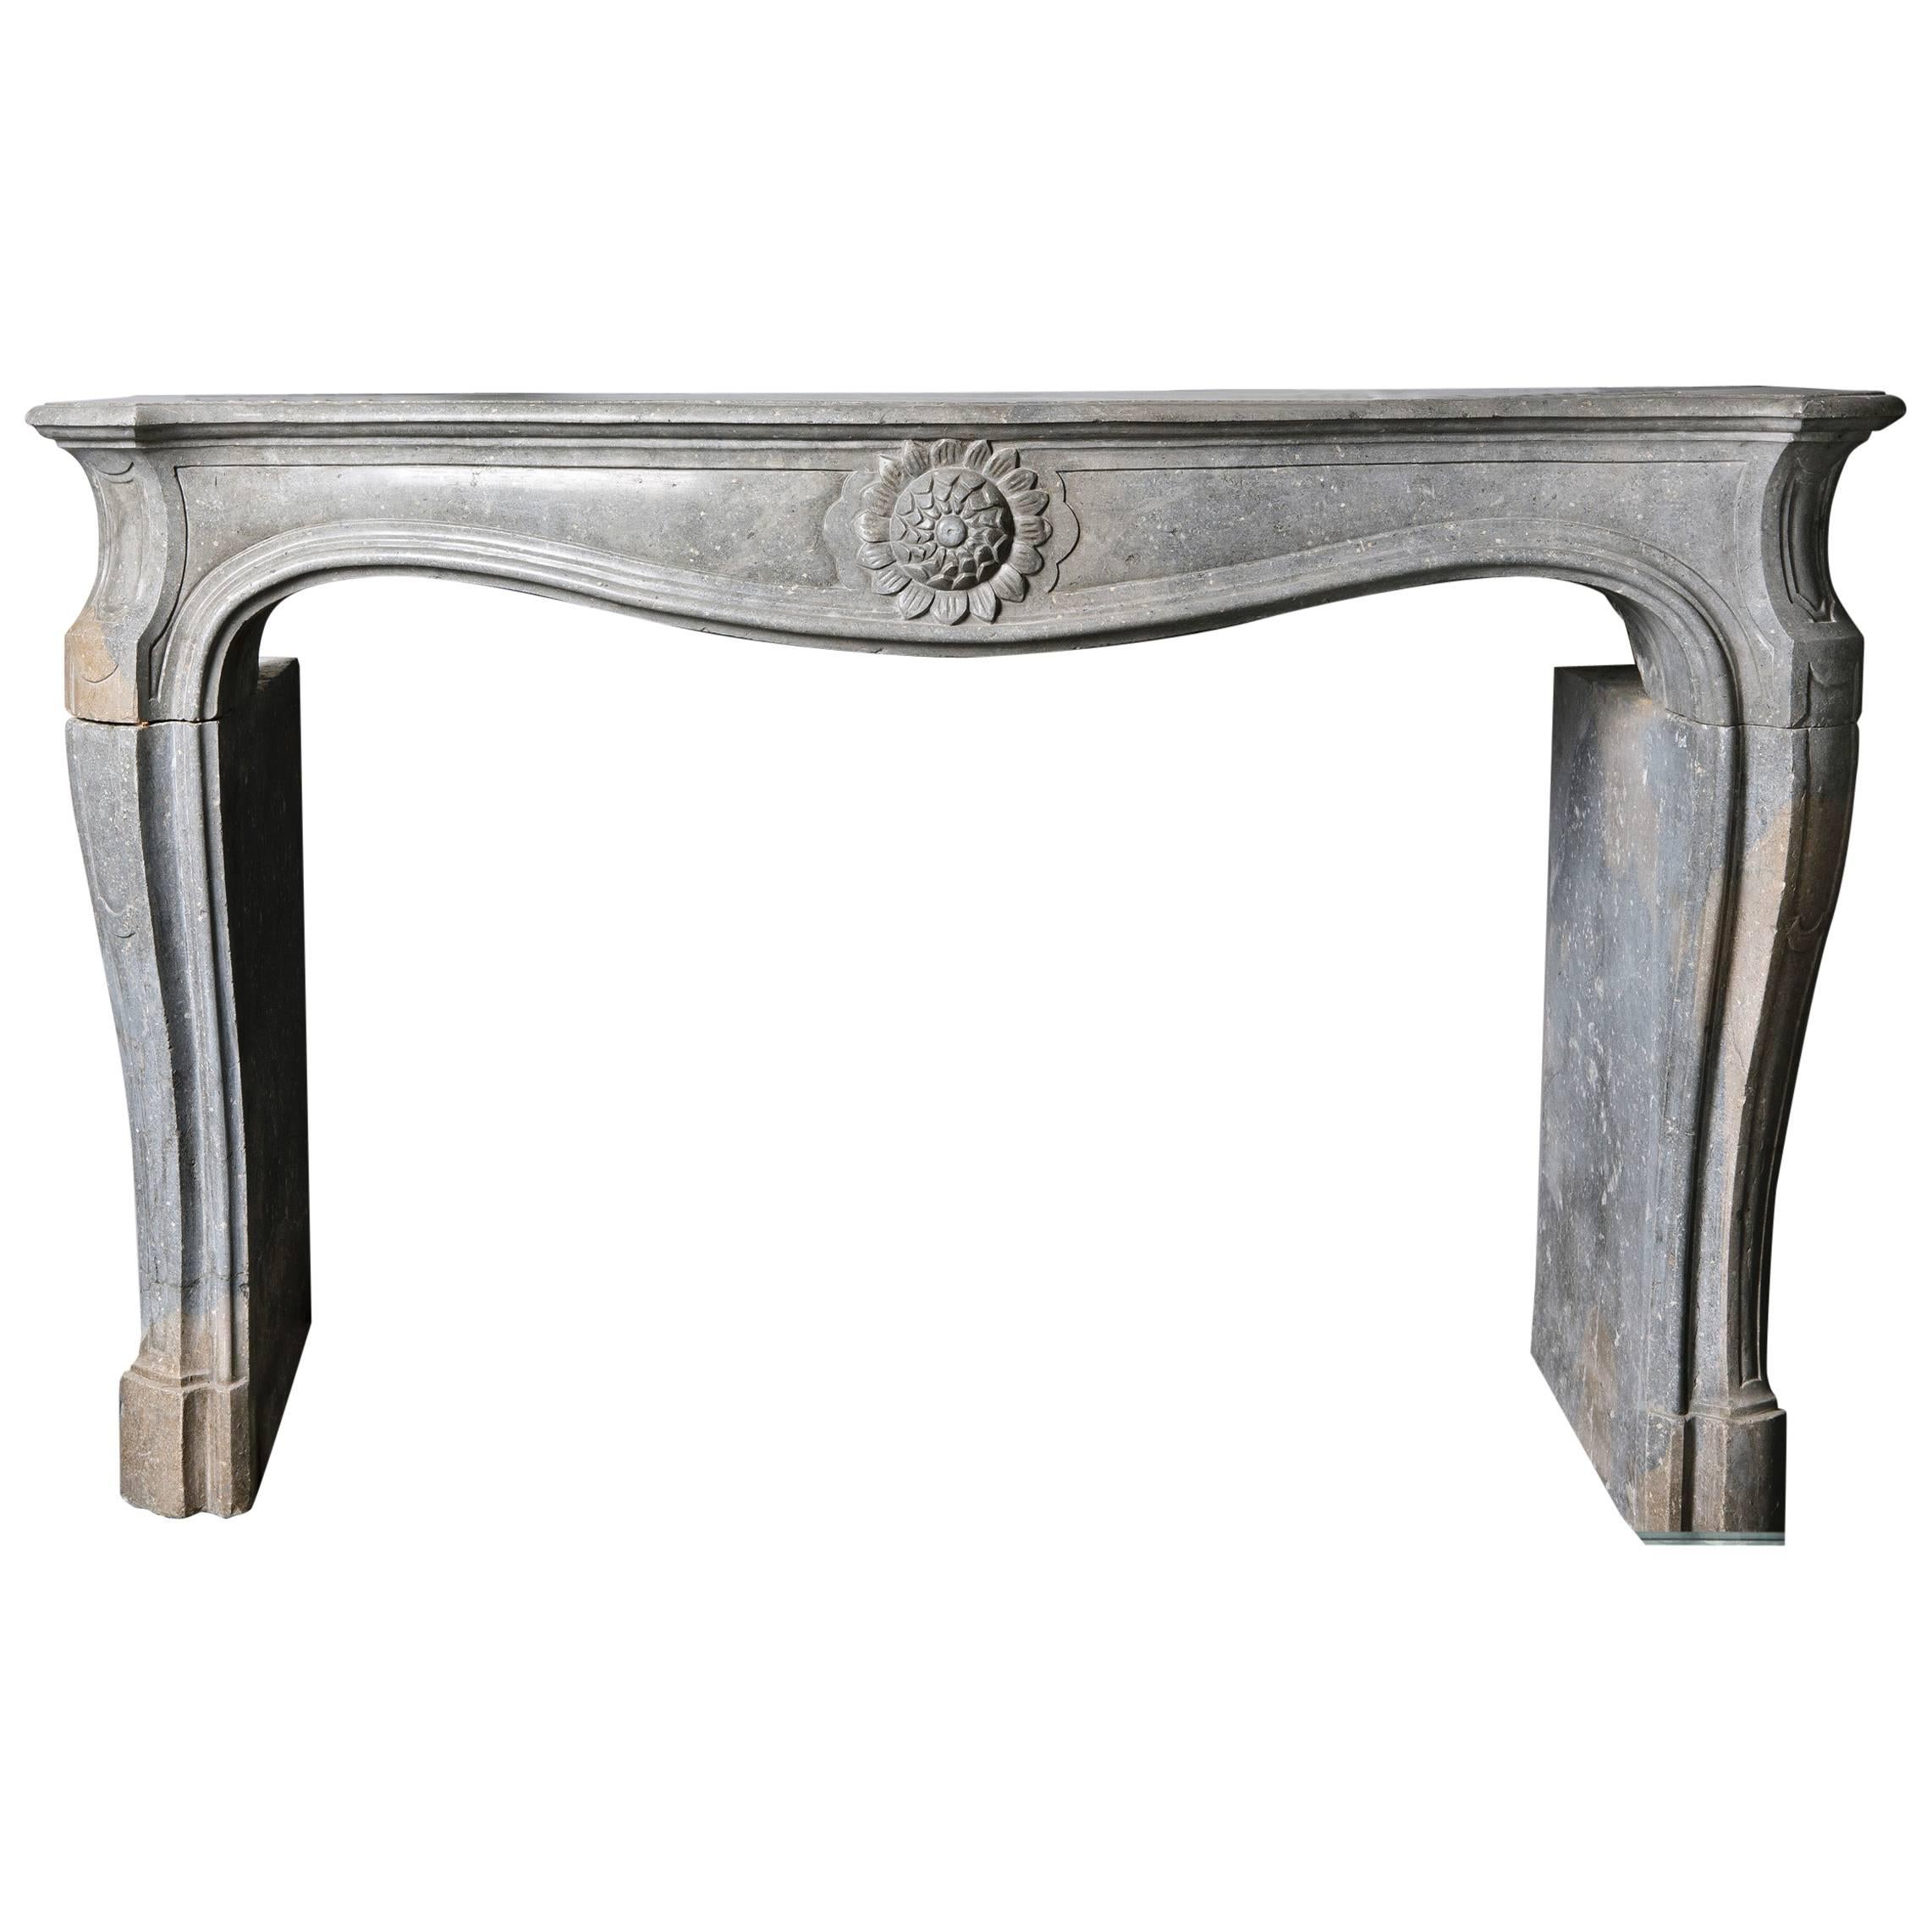 Early 18th Century Pierre de Bourgonge Mantel Piece with Louis XIV Reference For Sale